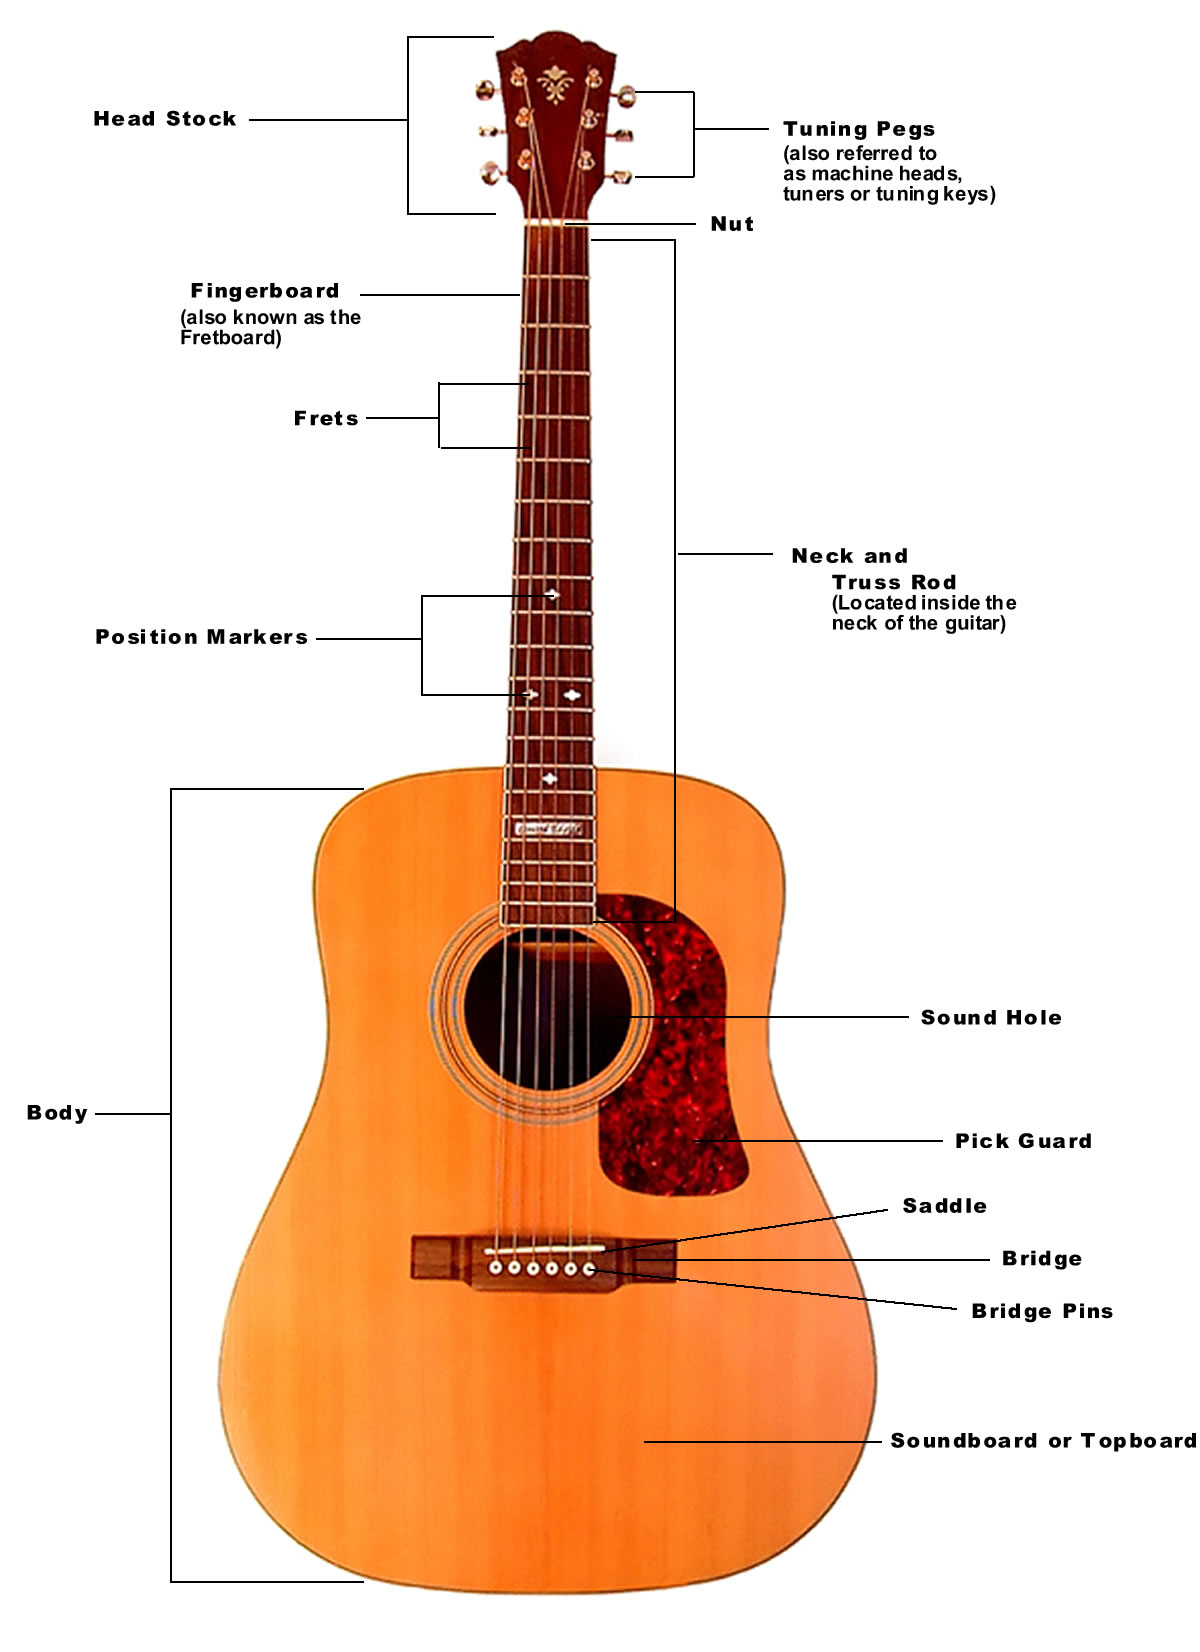 Below is a diagram of the acoustic guitar and its parts.